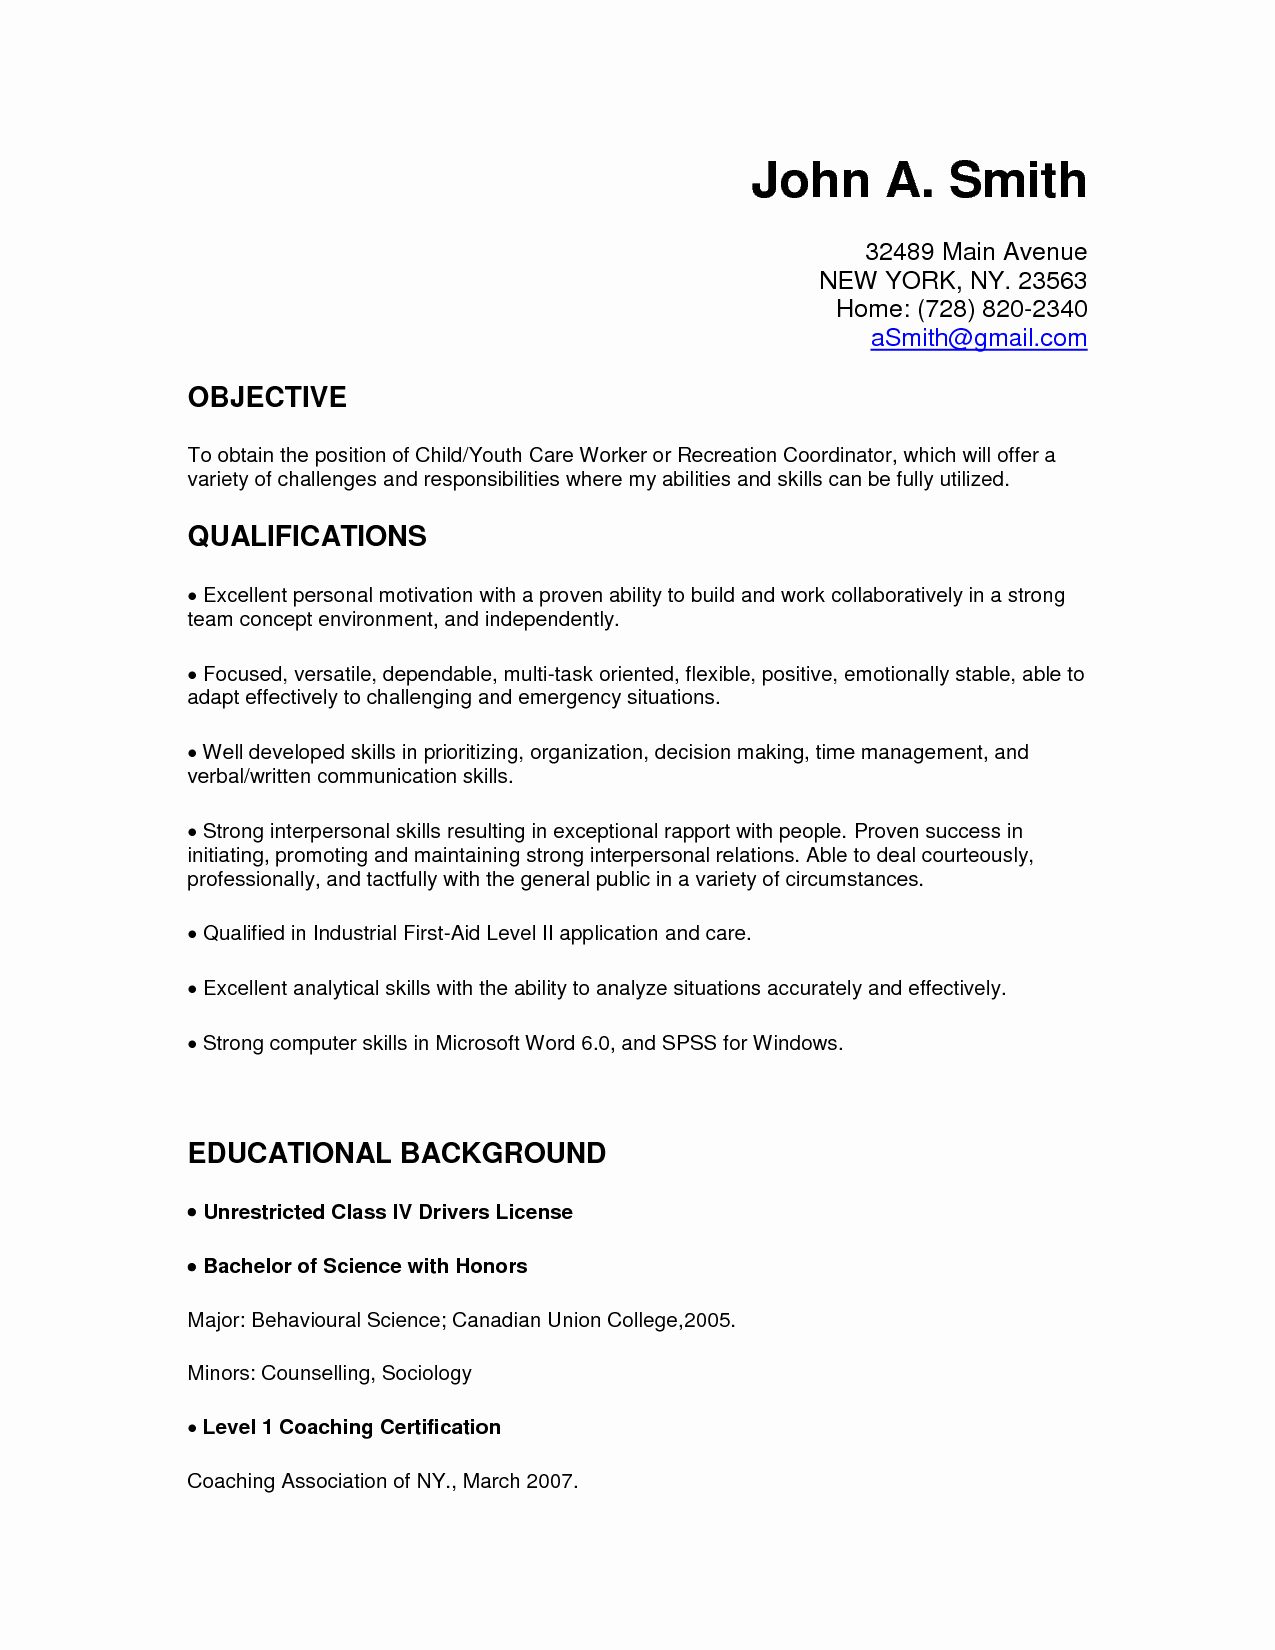 Recommendation Letter For Daycare Teacher Invazi inside proportions 1275 X 1650